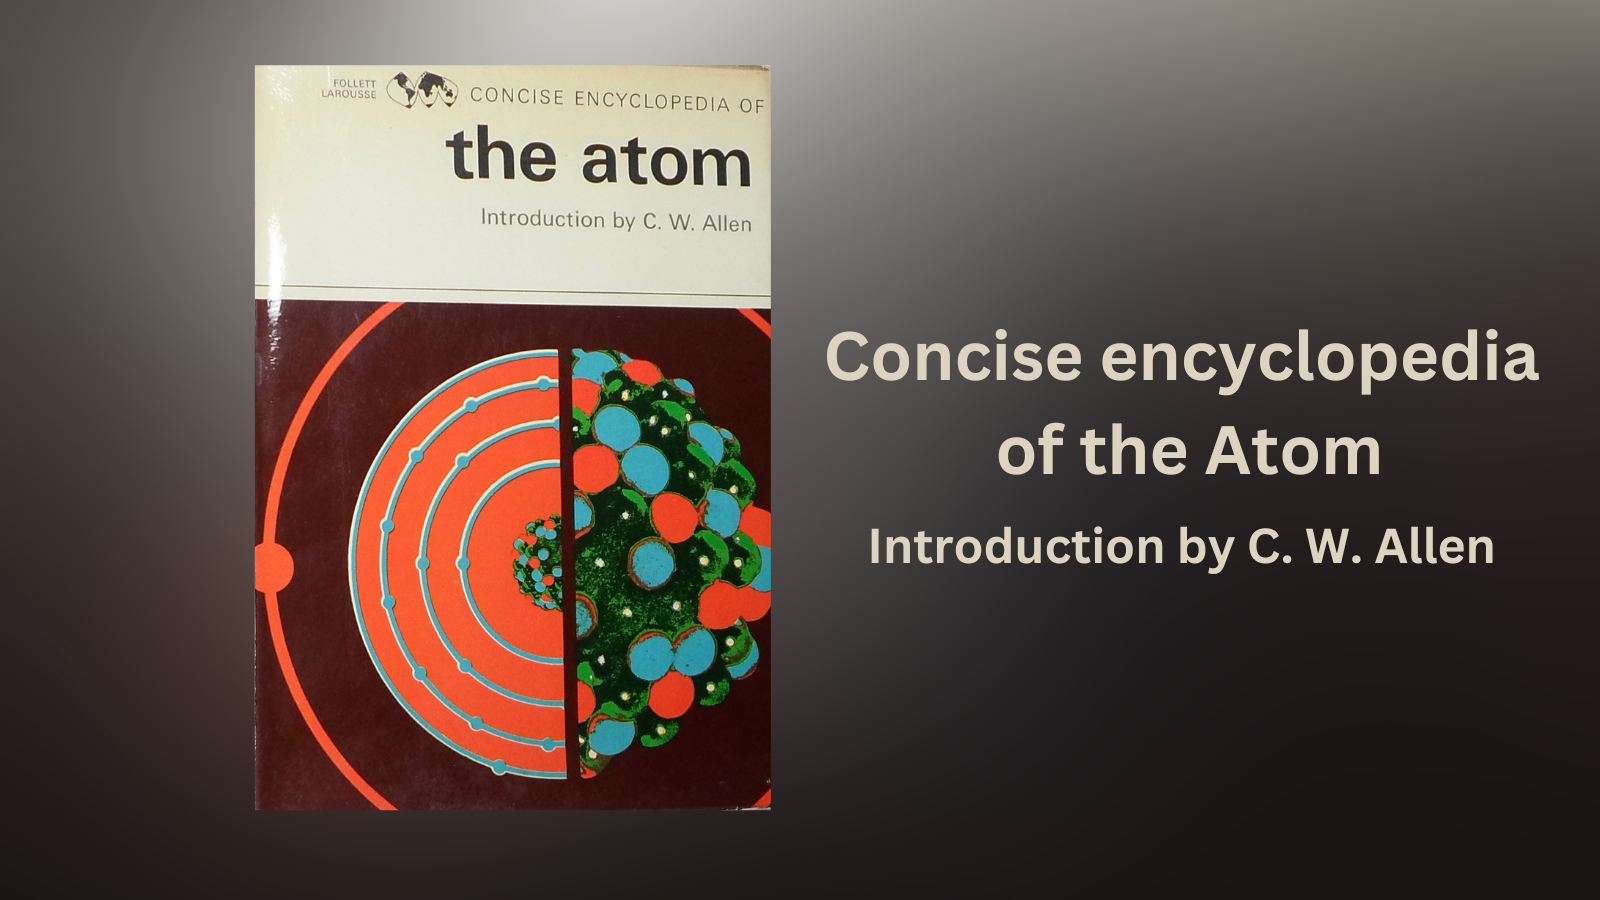 The Concise Encyclopedia of the Atom : Source of breakthrough information.